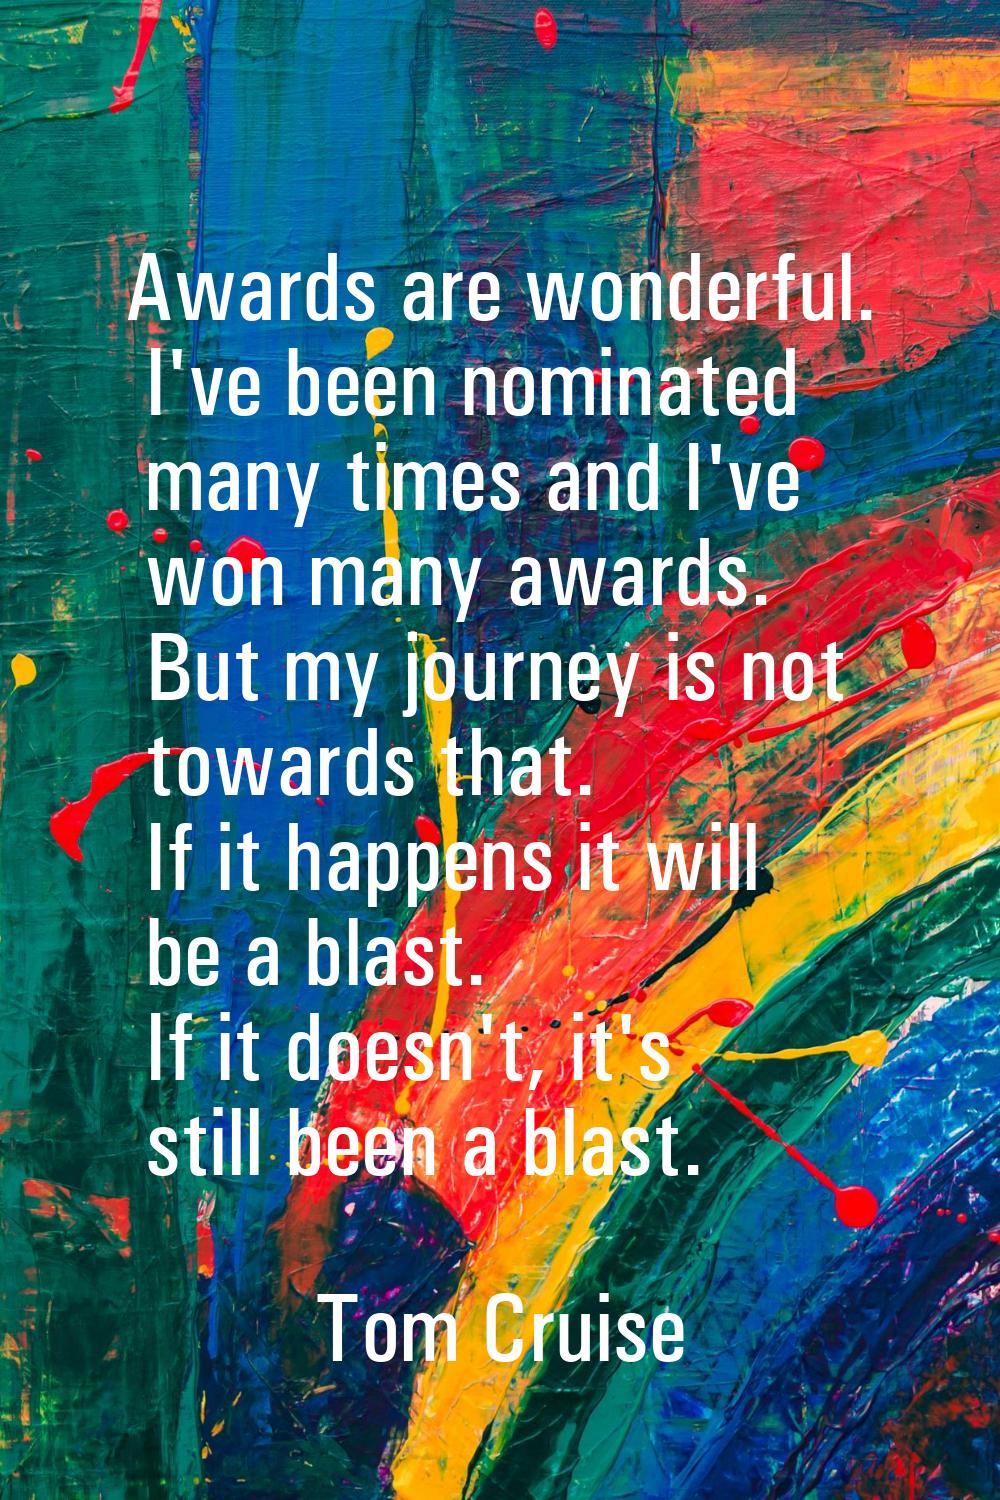 Awards are wonderful. I've been nominated many times and I've won many awards. But my journey is no